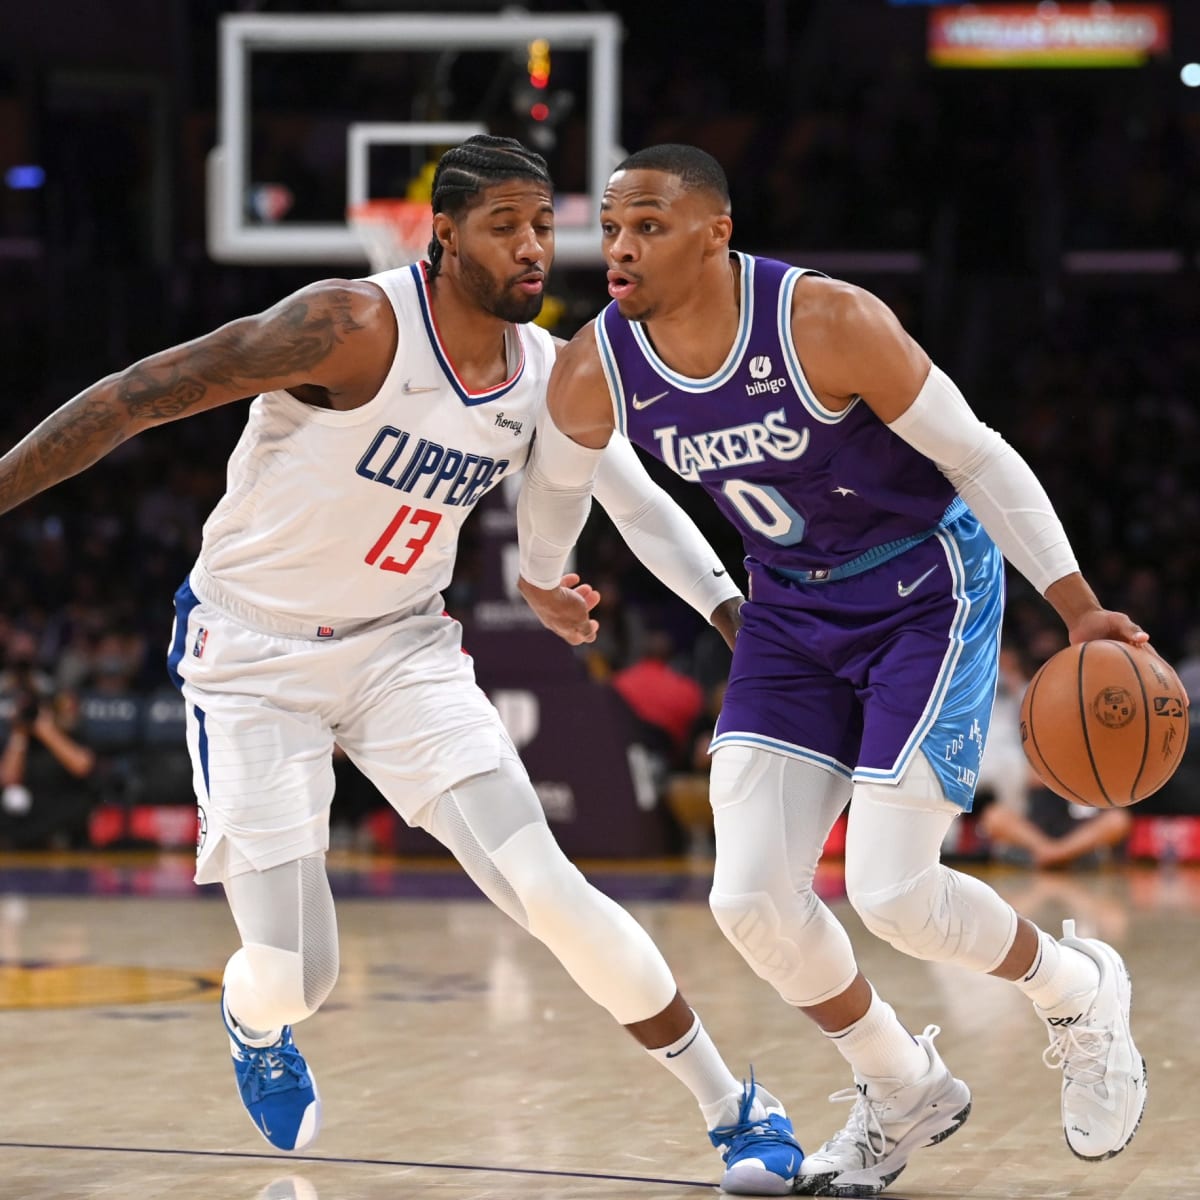 Russell Westbrook Rumors: Paul George Wants Clippers Star Back